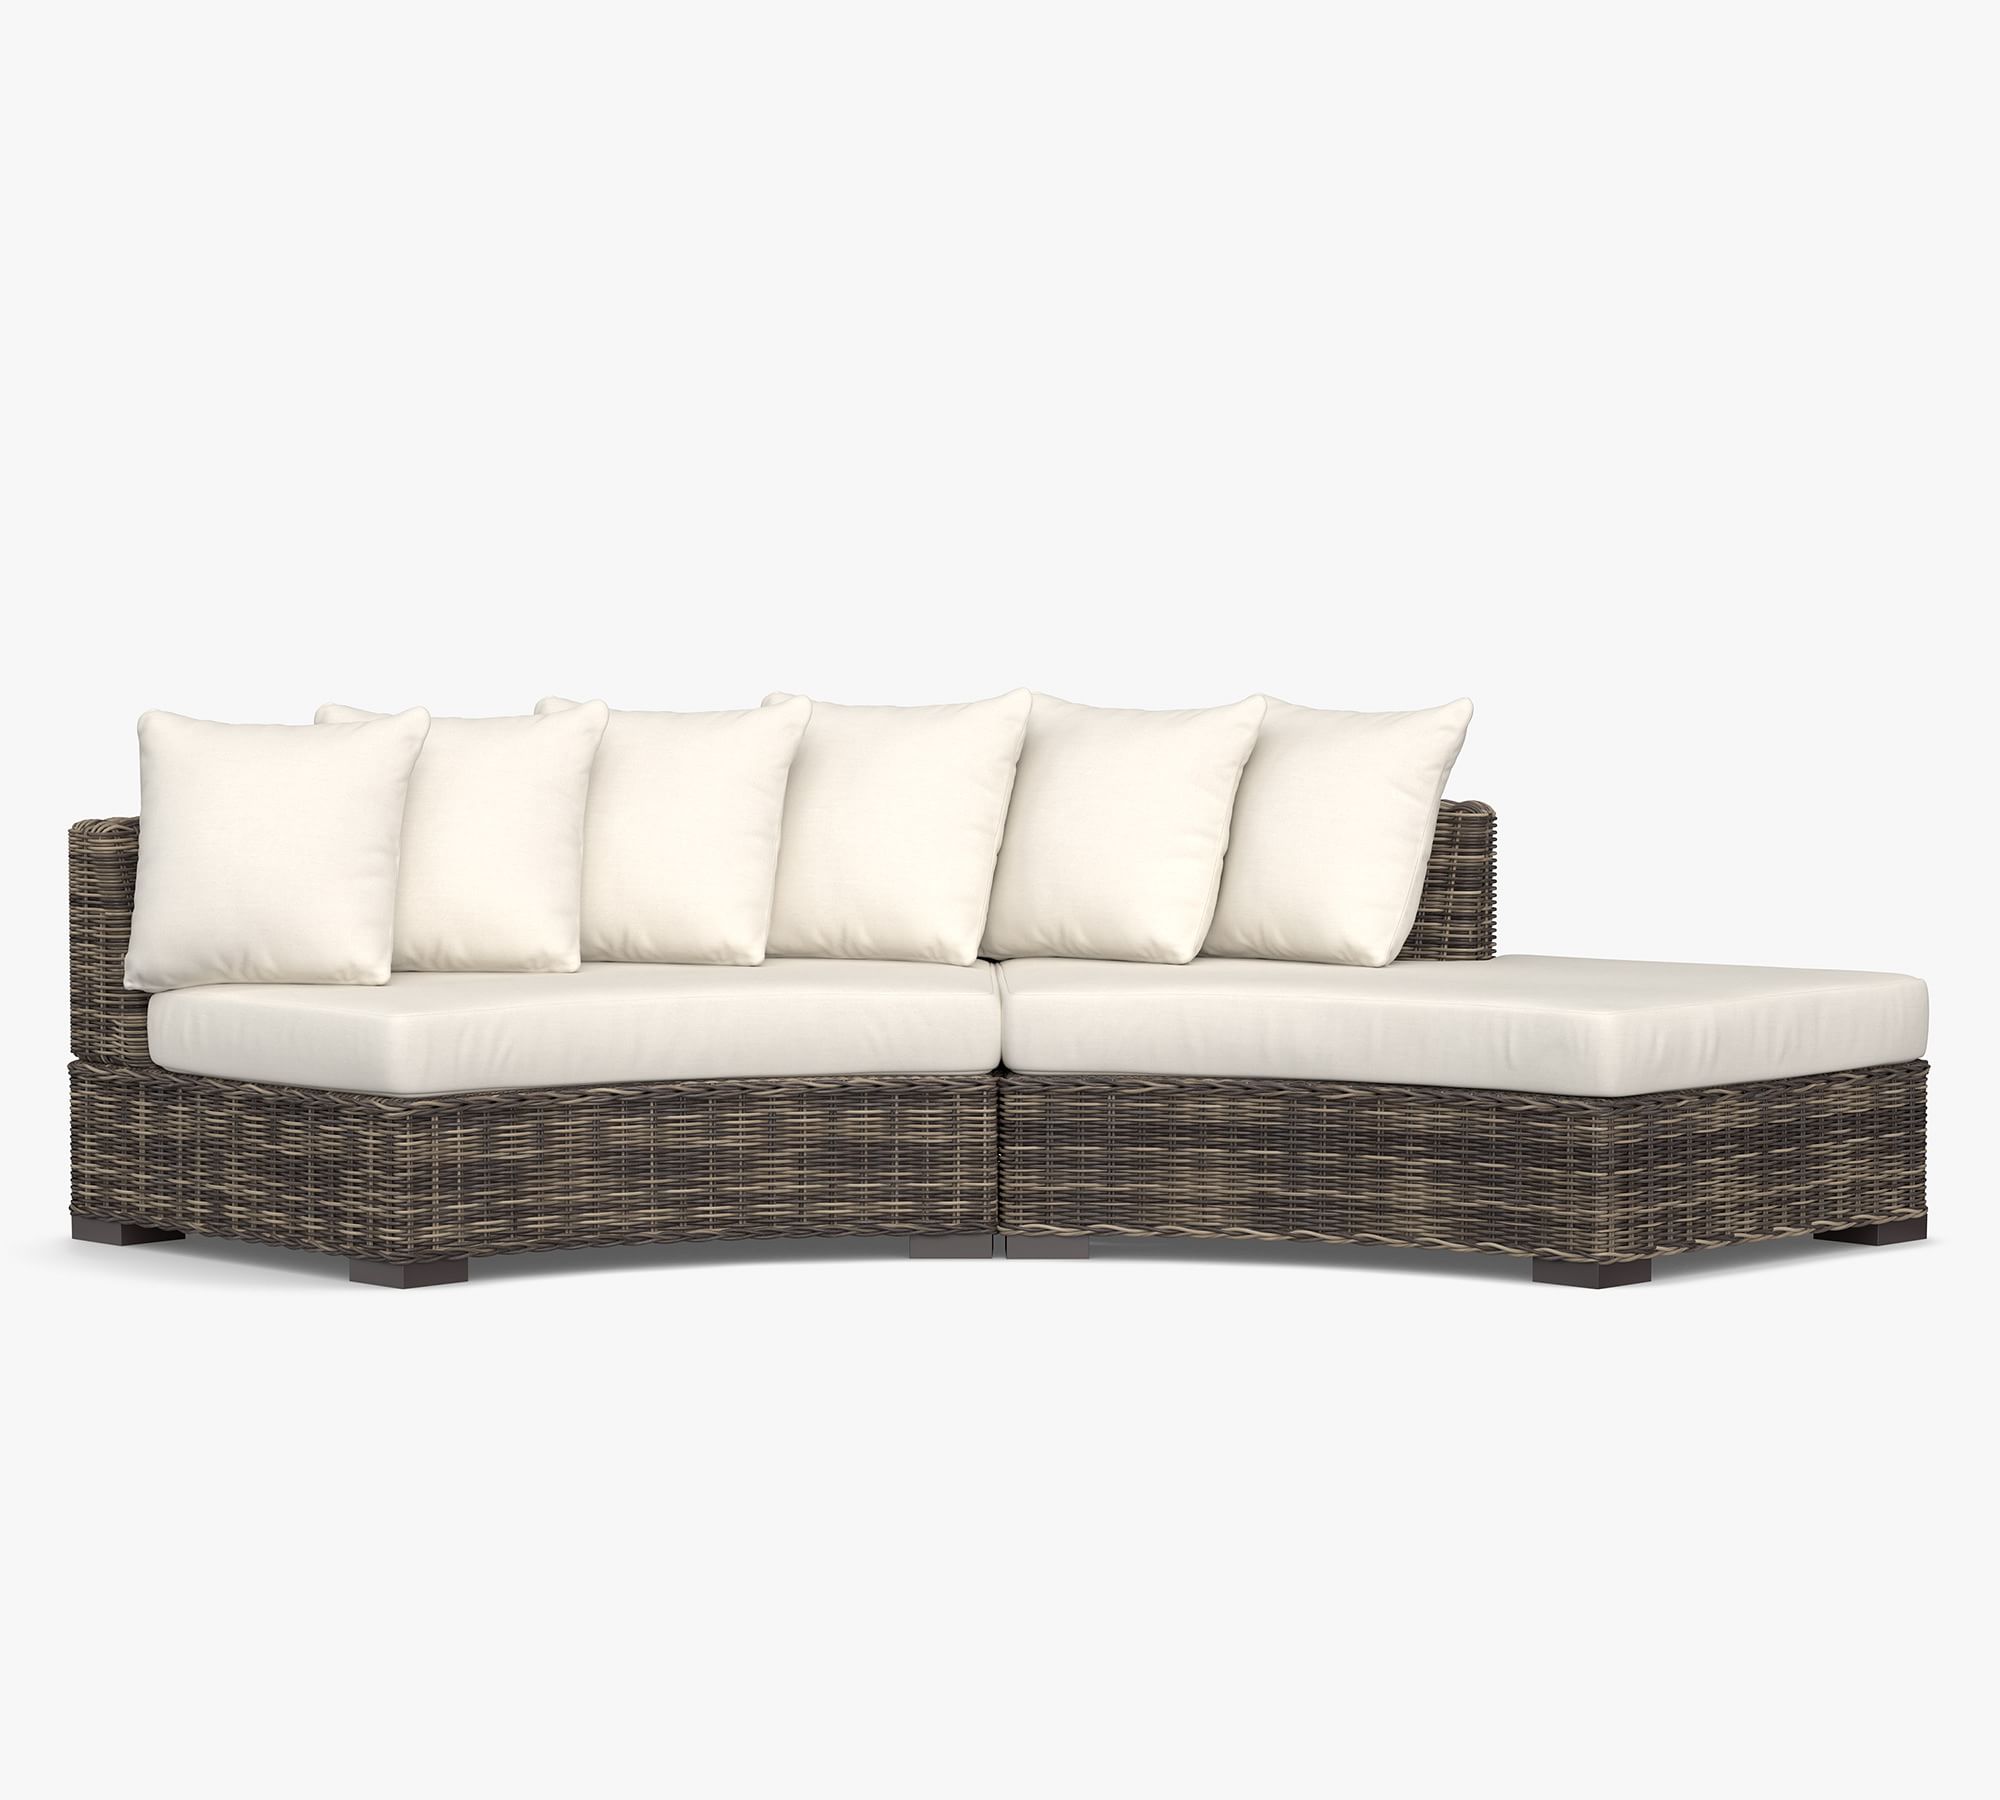 Huntington Wicker Rounded Outdoor Sectional Set (137")